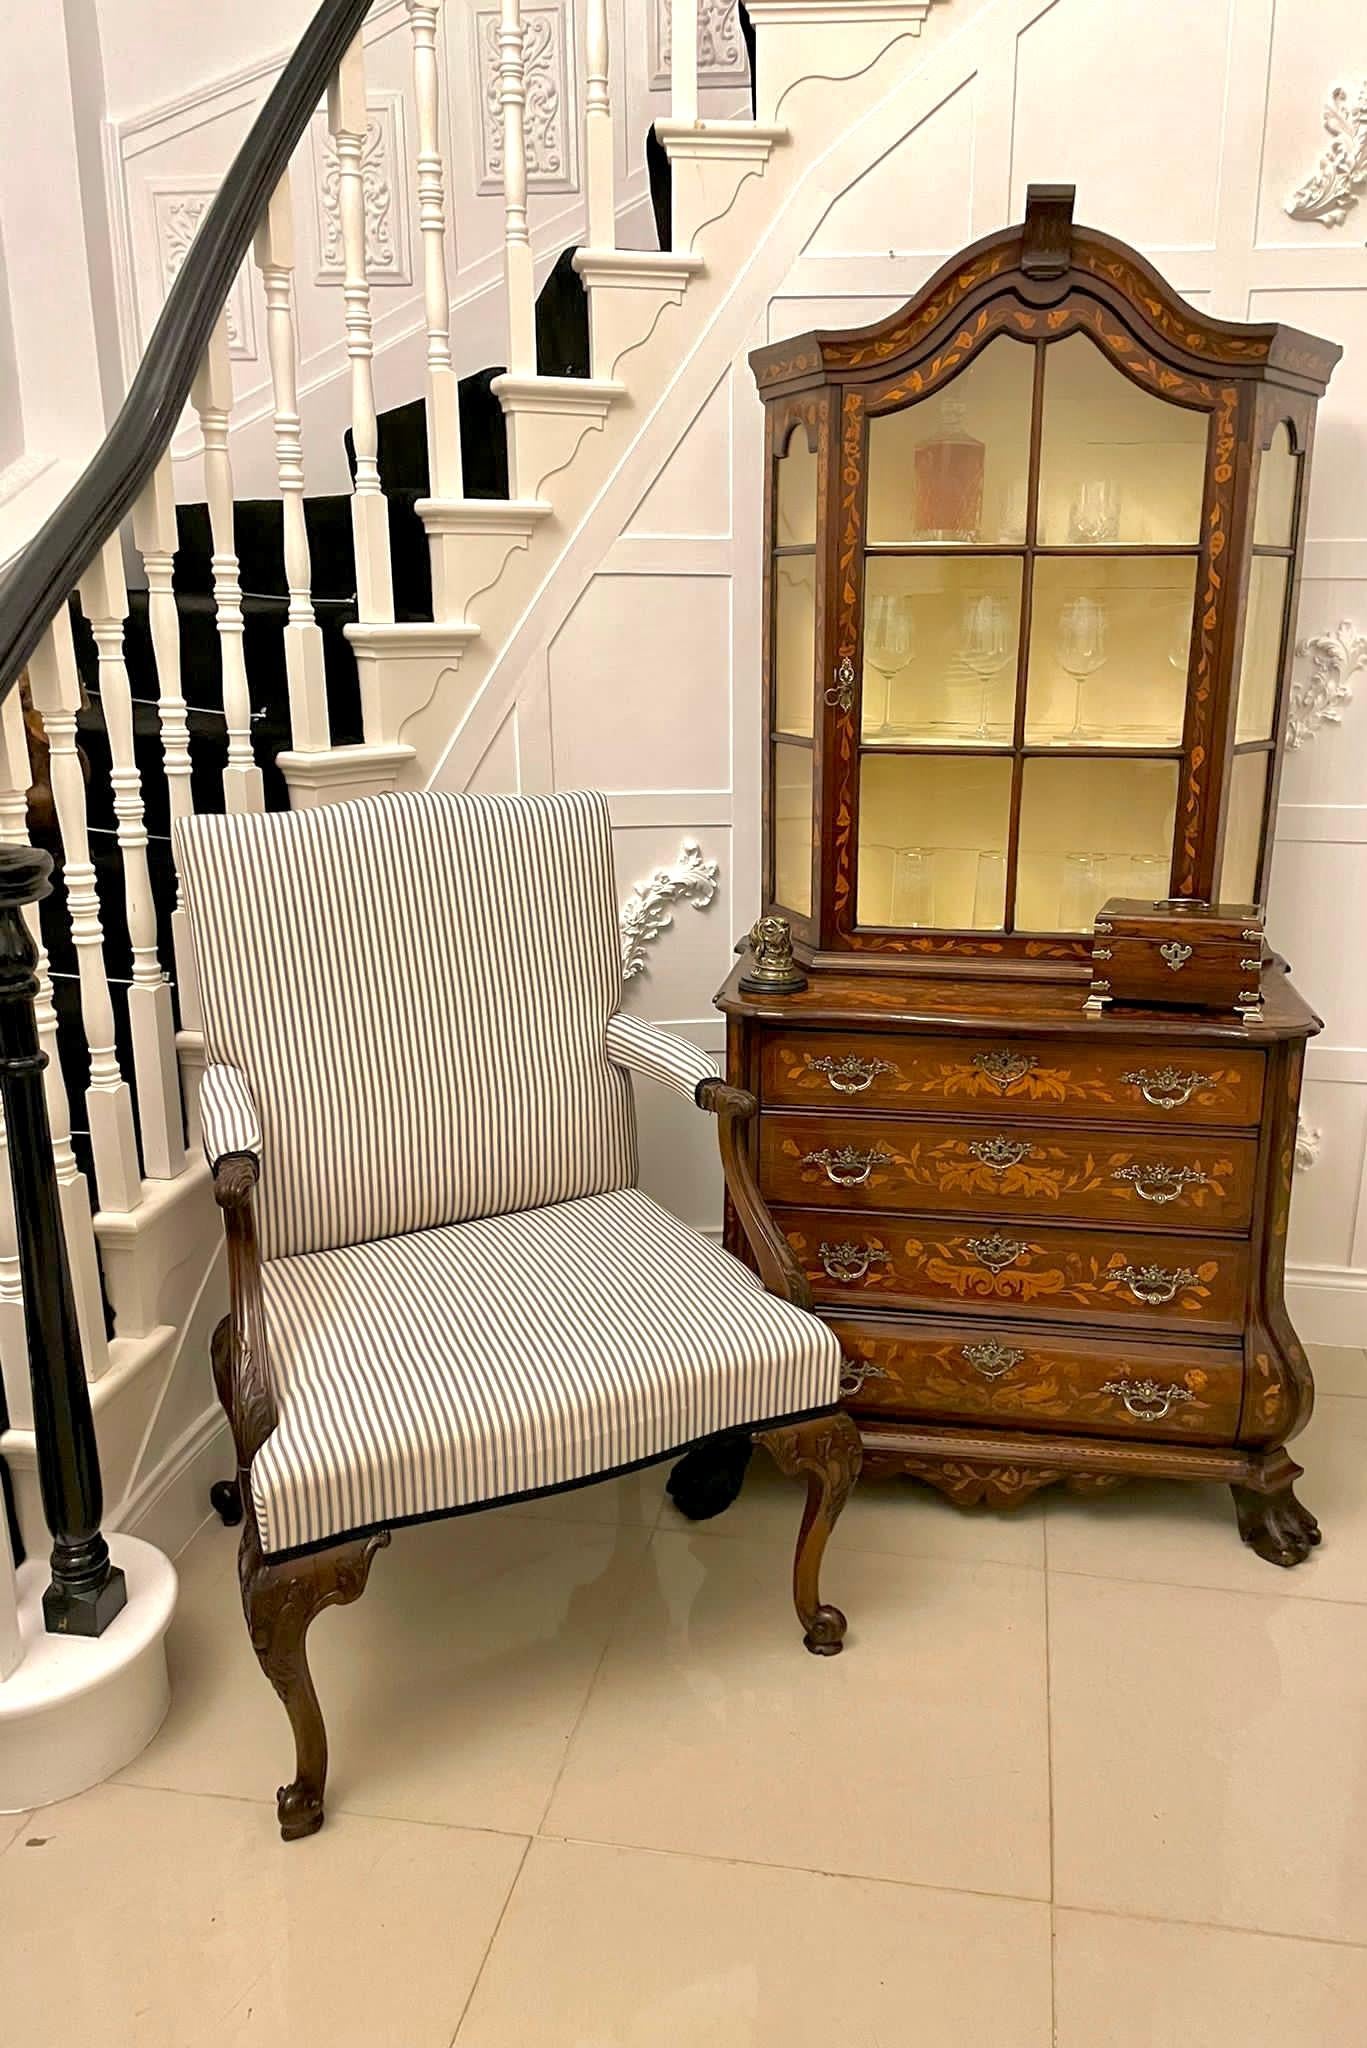 Outstanding quality large antique Victorian carved mahogany Gainsborough armchair having outstanding quality carved mahogany open arms standing on four carved mahogany cabriole legs with scroll feet, newly reupholstered in a quality fabric

A